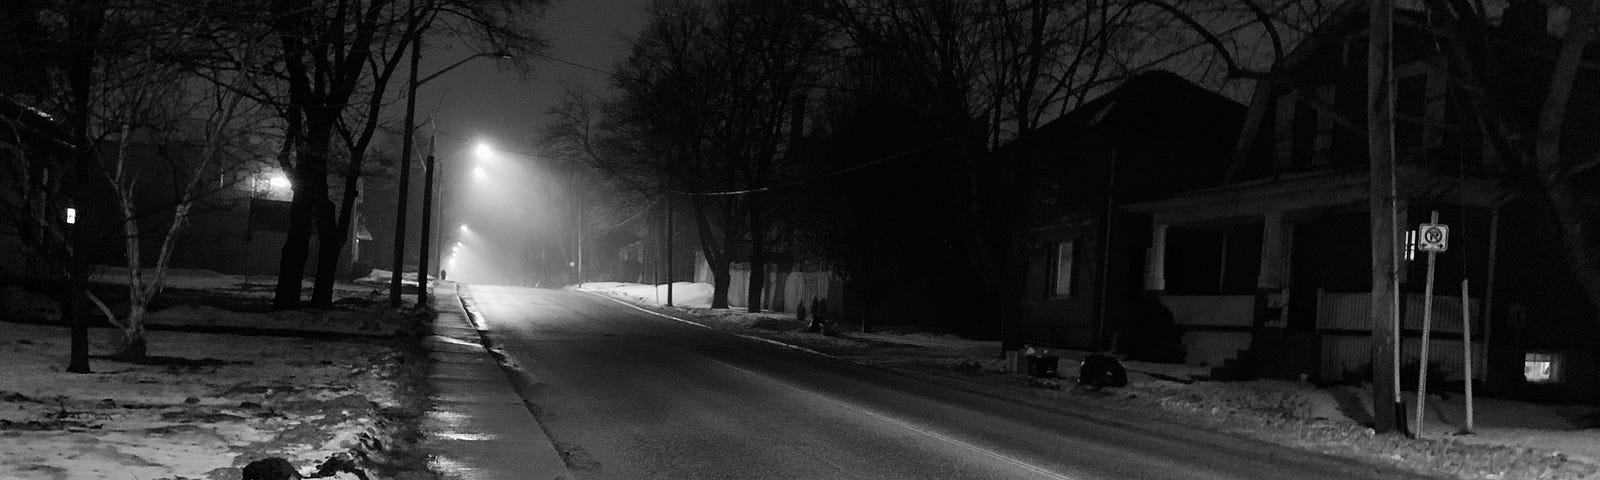 Dark street, with some fog, and a street light burning at the end